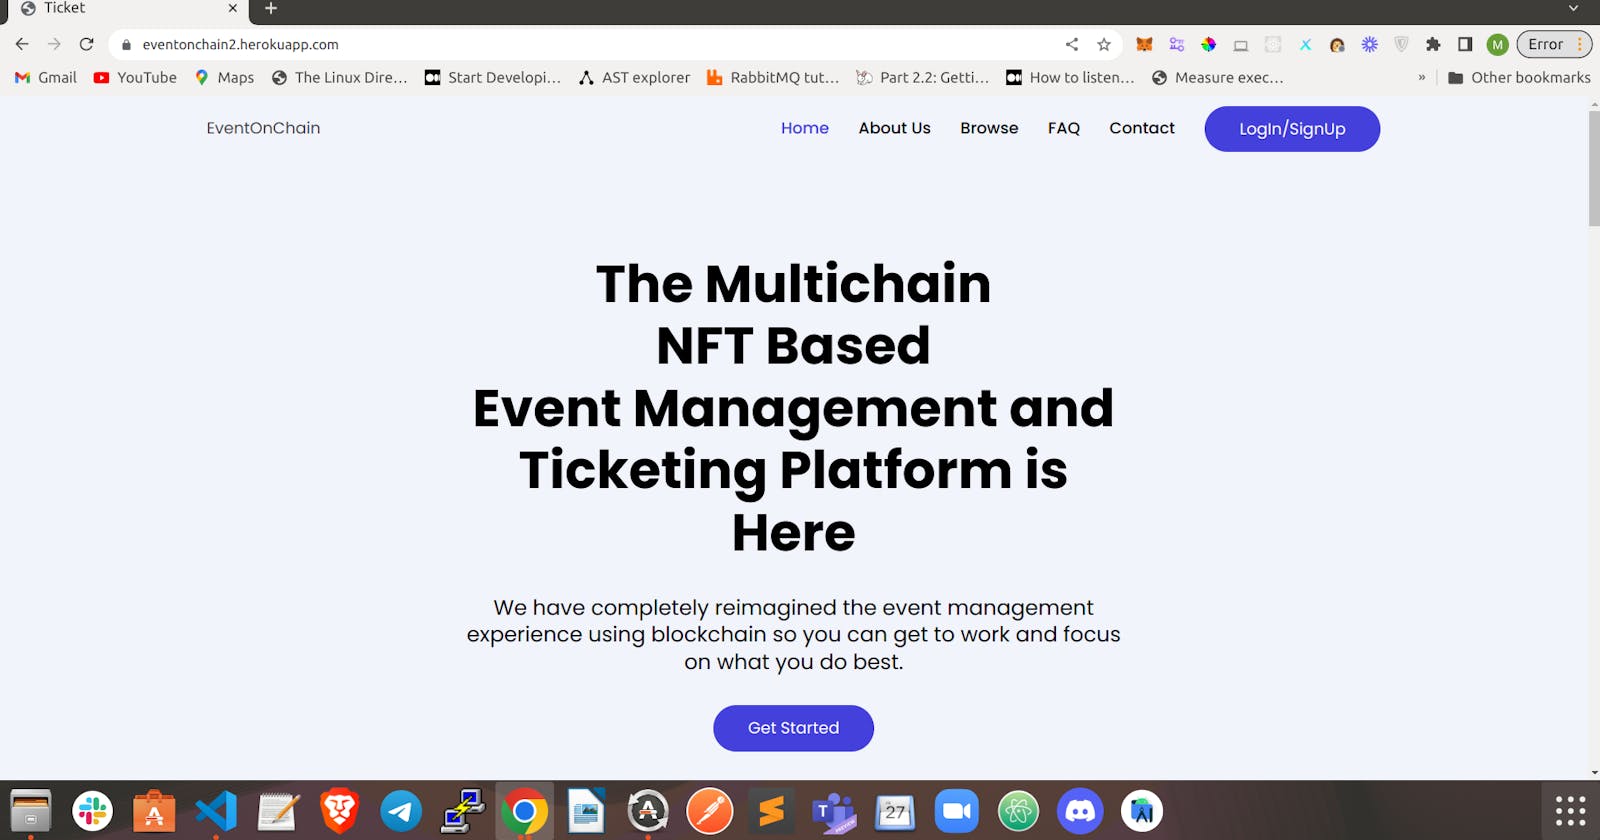 Multichain NFT based Event Management and Ticketing Platform is here